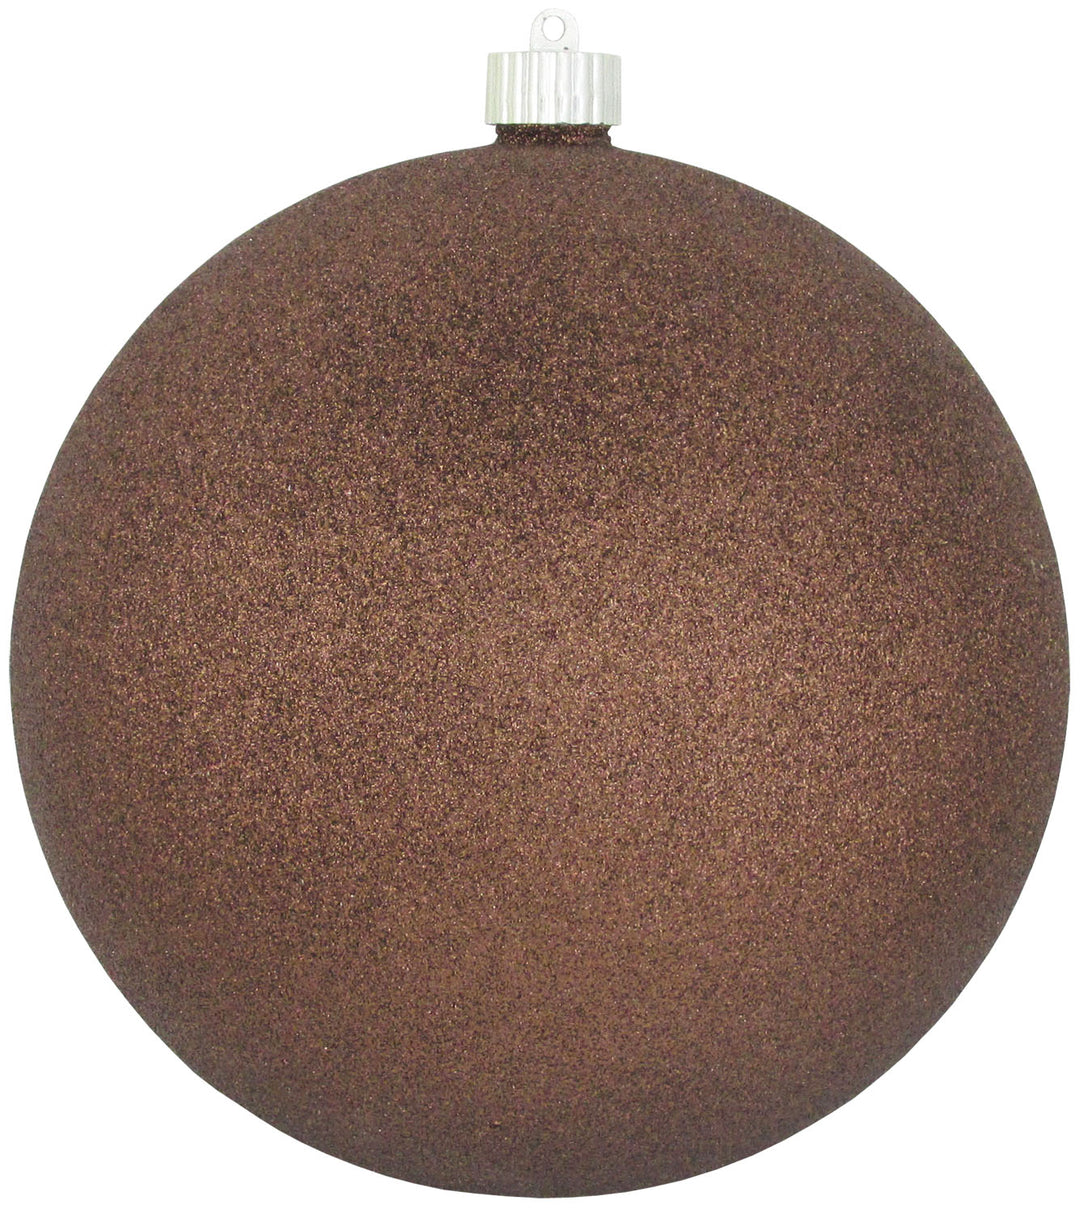 Christmas By Krebs 8" (200mm) Brown Glitter [1 Piece] Solid Commercial Grade Indoor and Outdoor Shatterproof Plastic, Water Resistant Ball Ornament Decorations